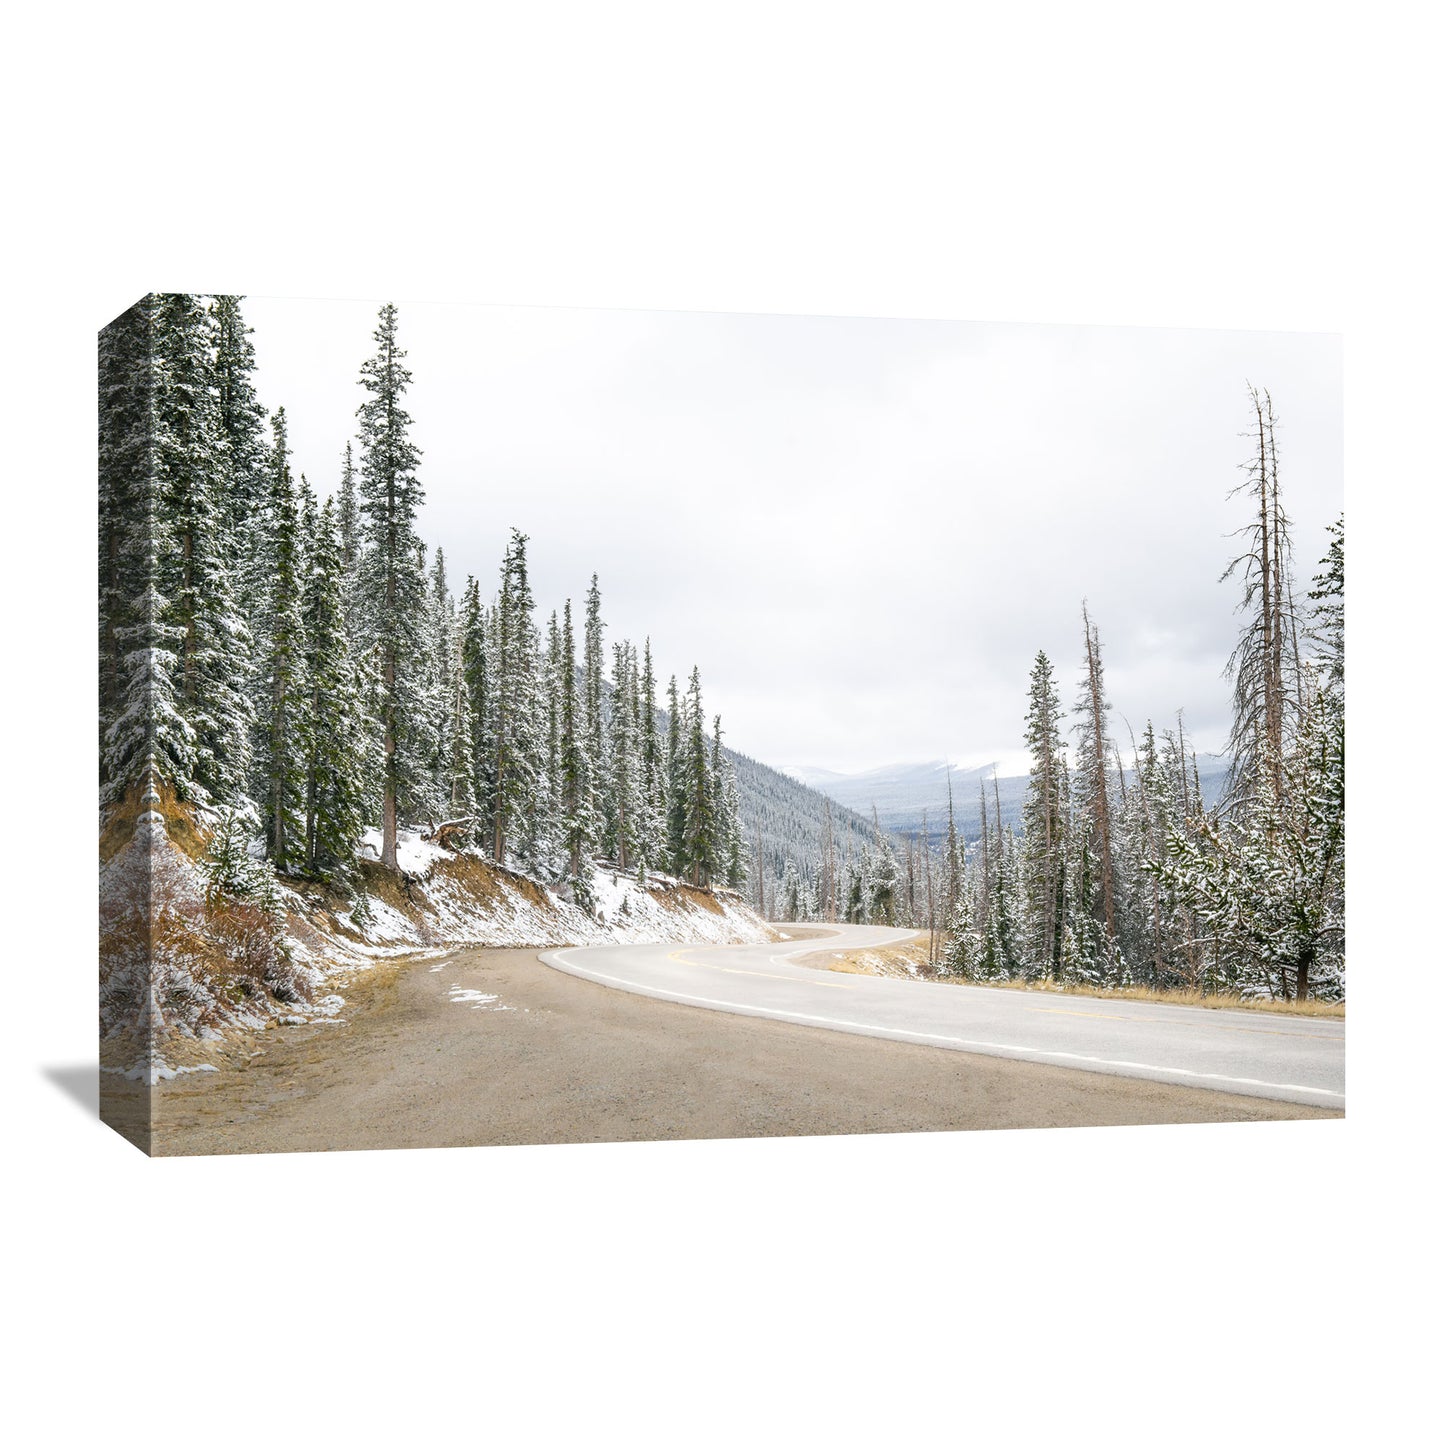 Nature photography featuring winter at Hoosier Pass in Colorado